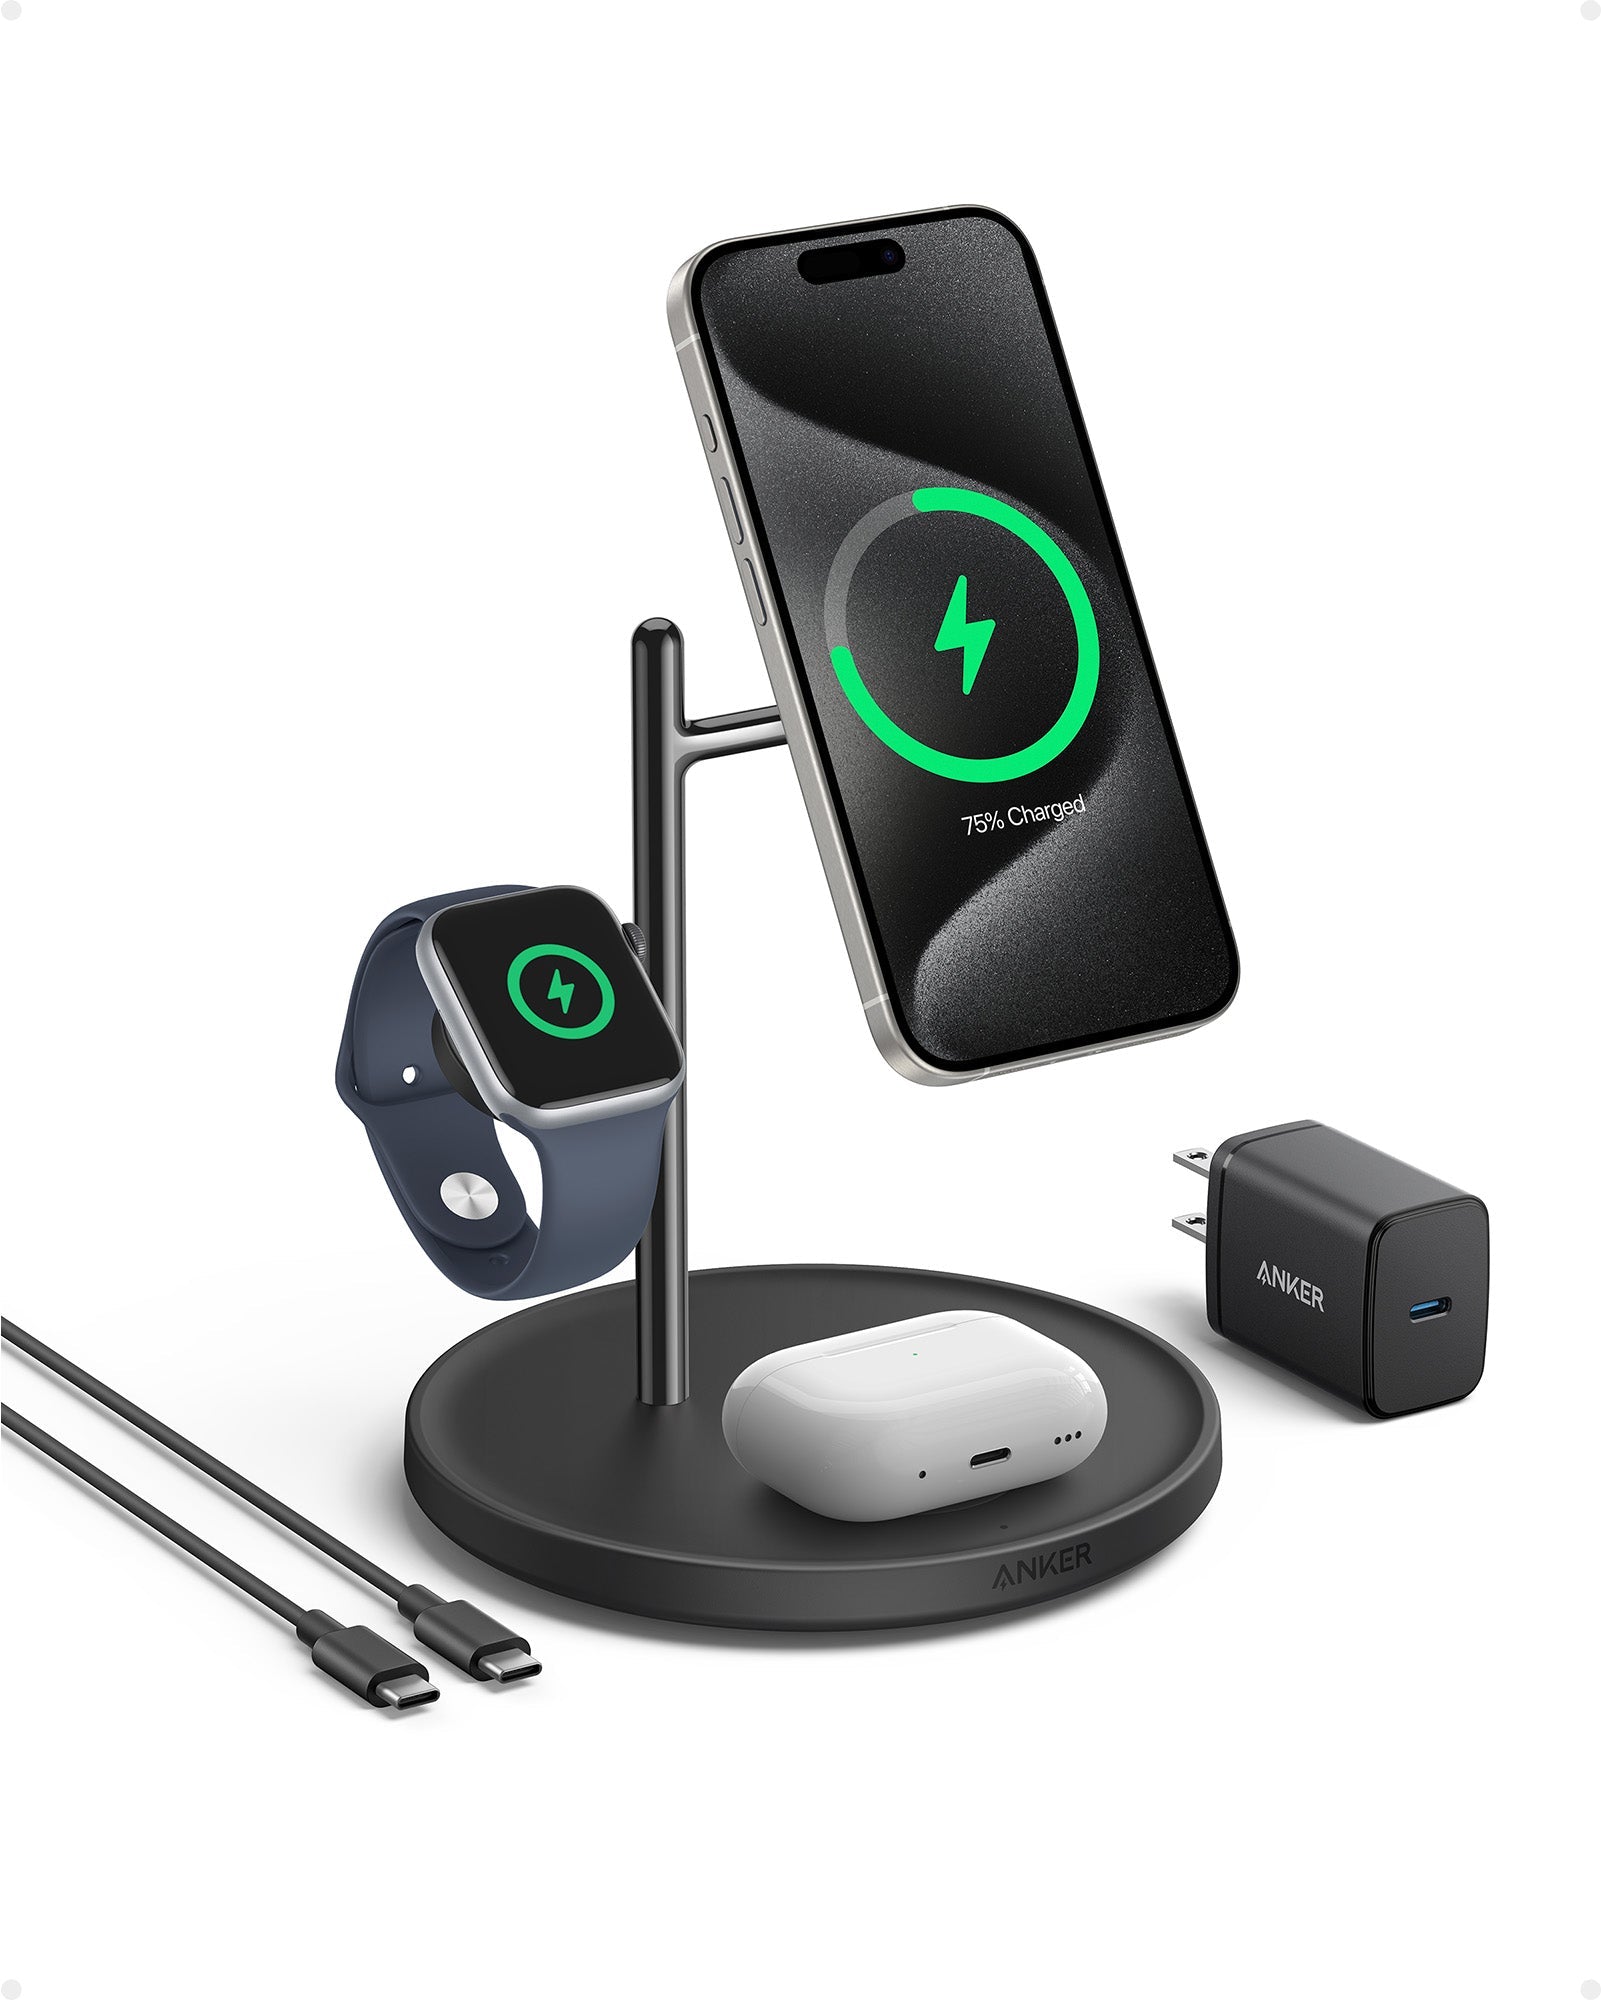 Belkin is showing off MagSafe-like magnetic Qi2 wireless chargers